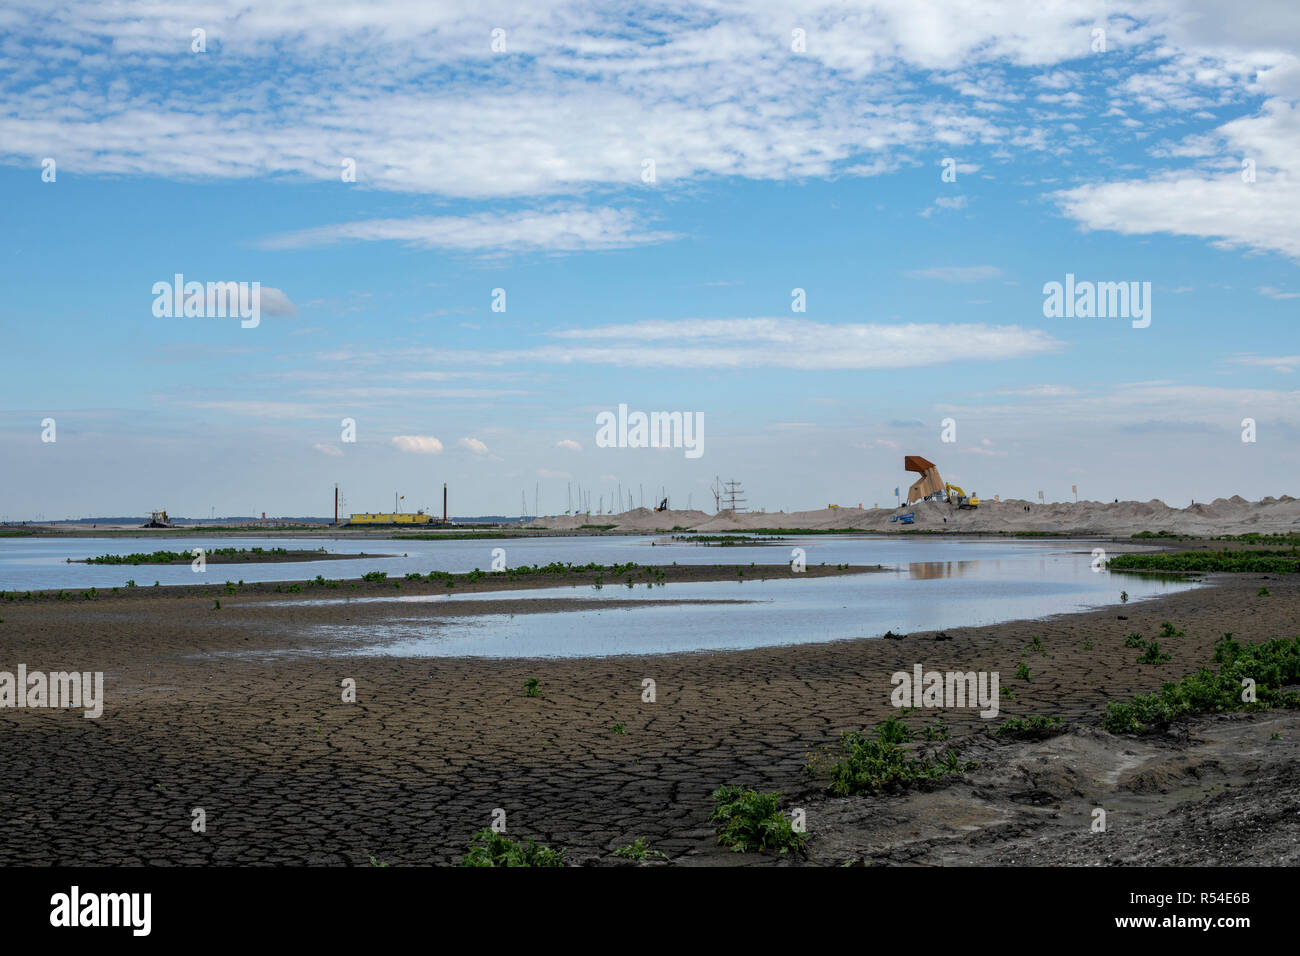 Bird watching tower on new islands, artificial archipelago in development, located in the Markermeer, a lake in the Netherlands, the Marker Wadden in  Stock Photo